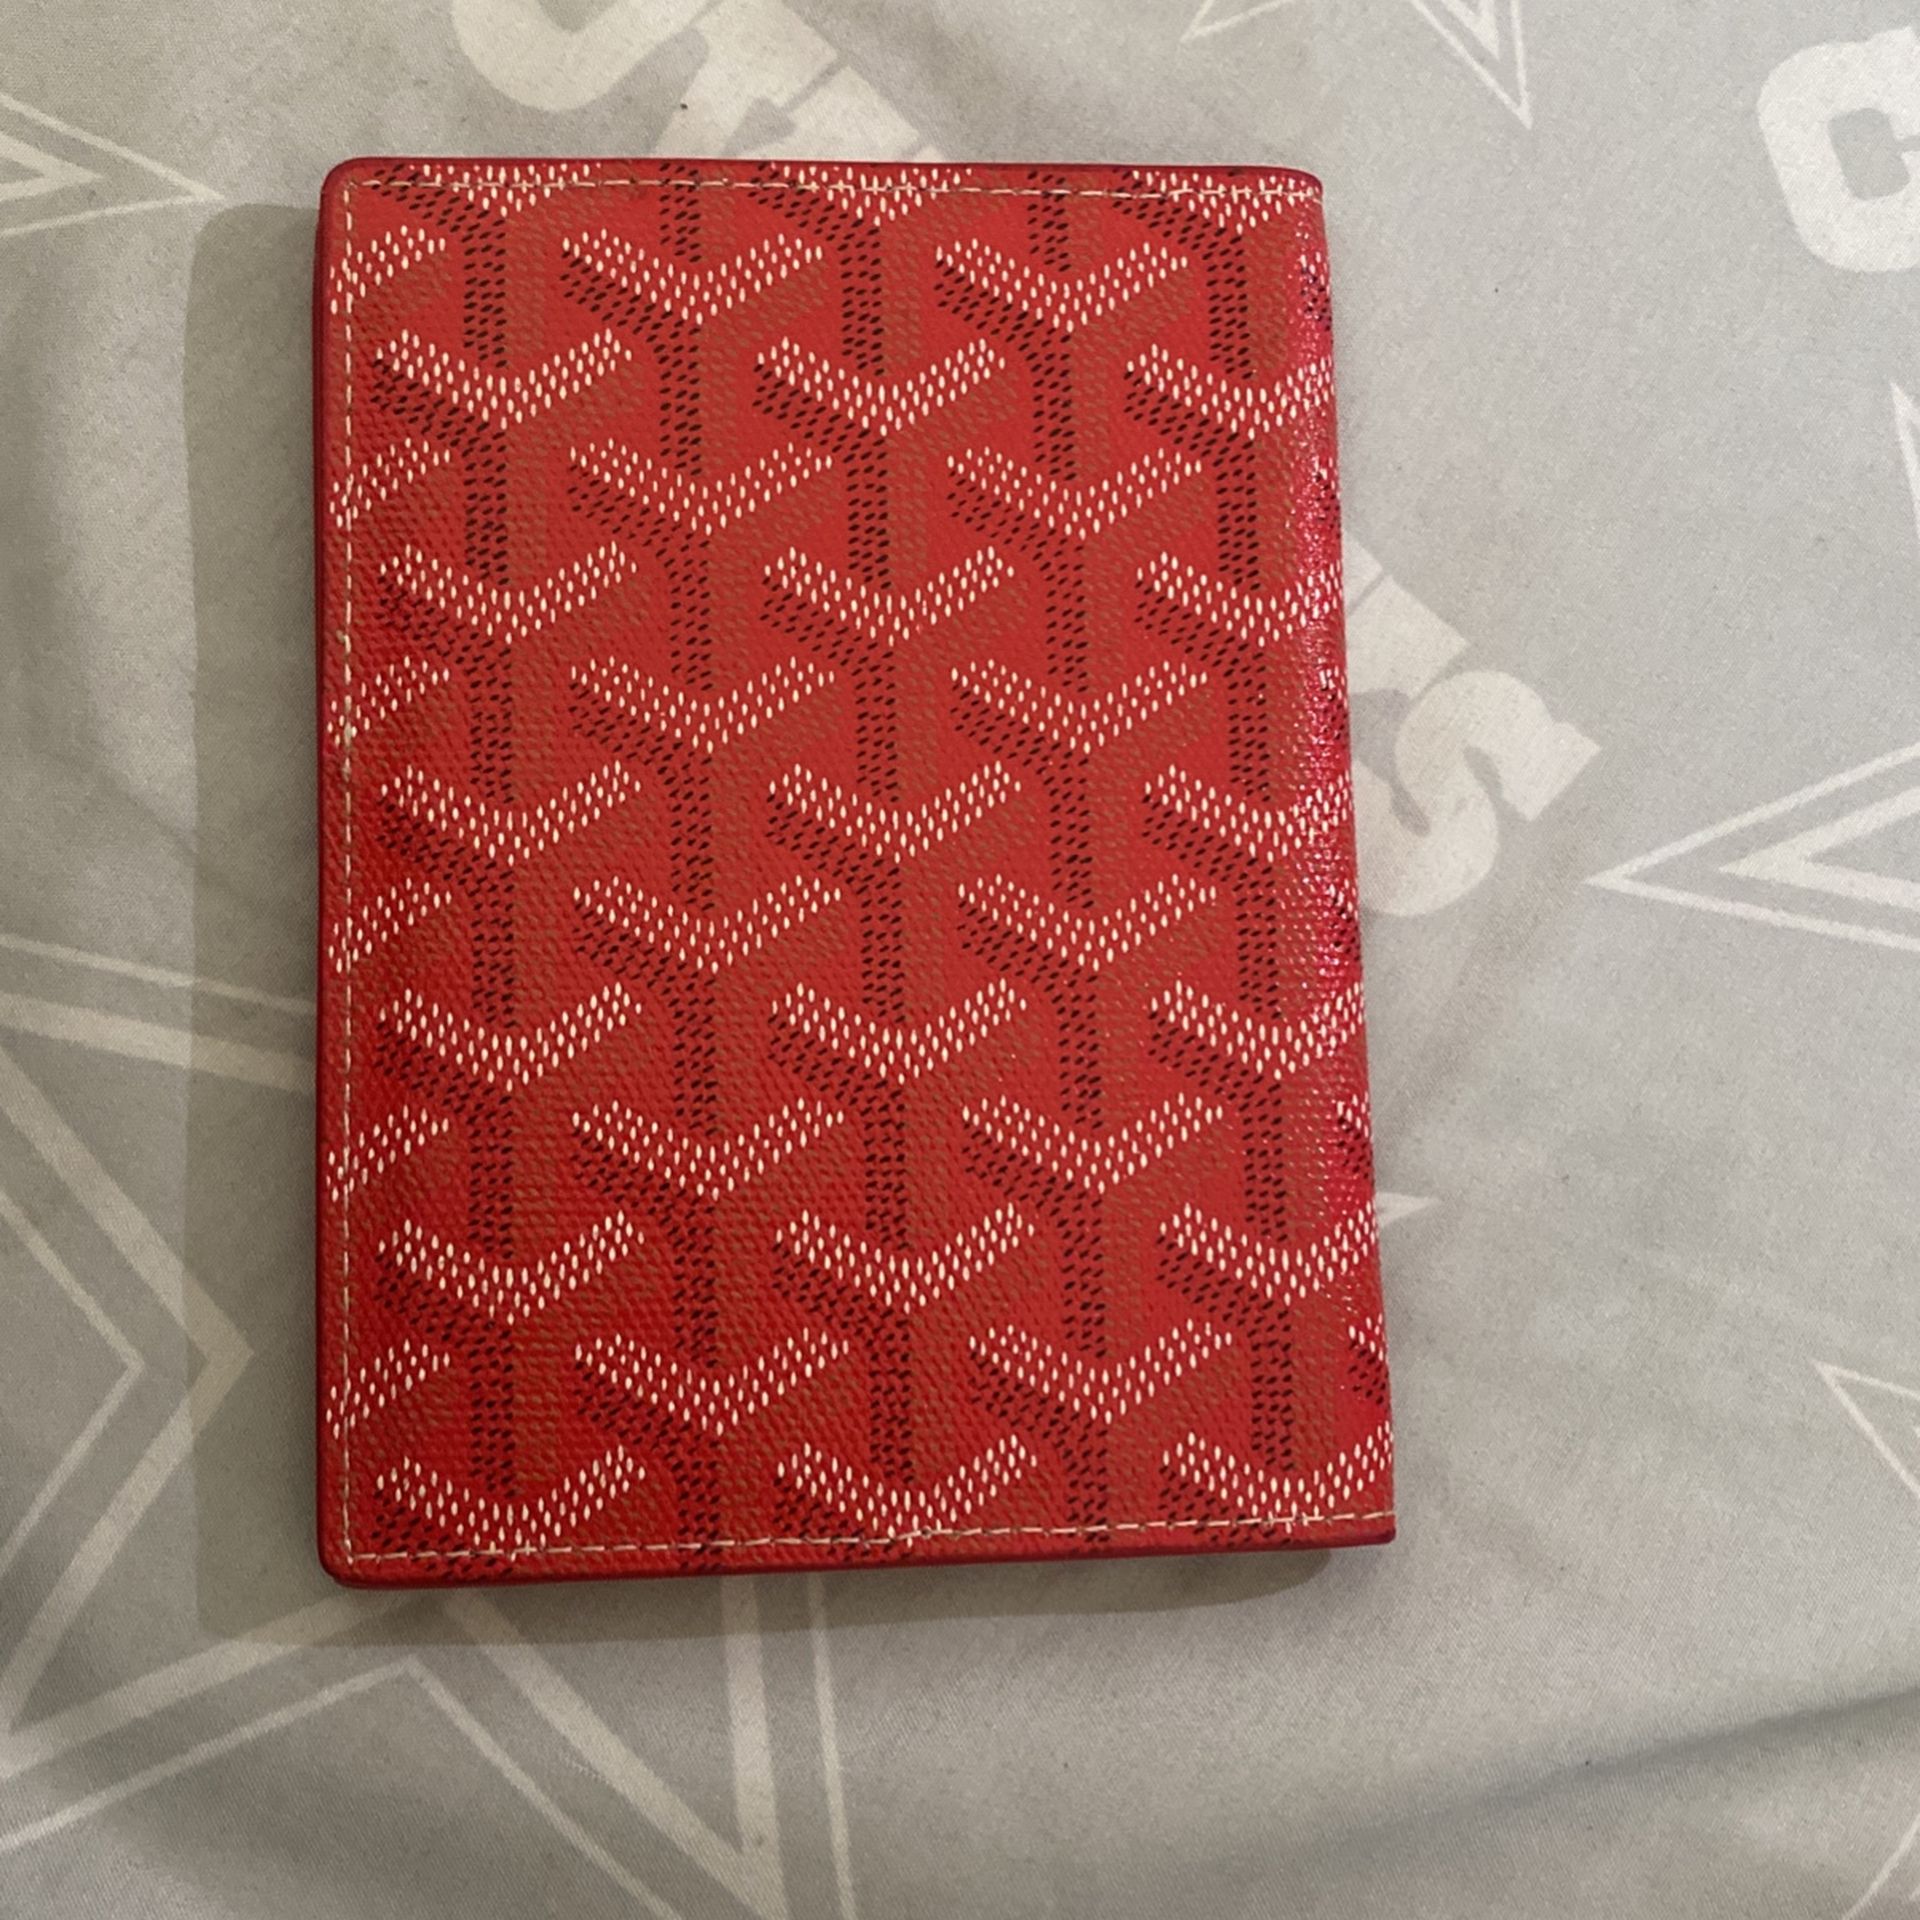 Red Goyard wallet slightly used for Sale in Merrick, NY - OfferUp